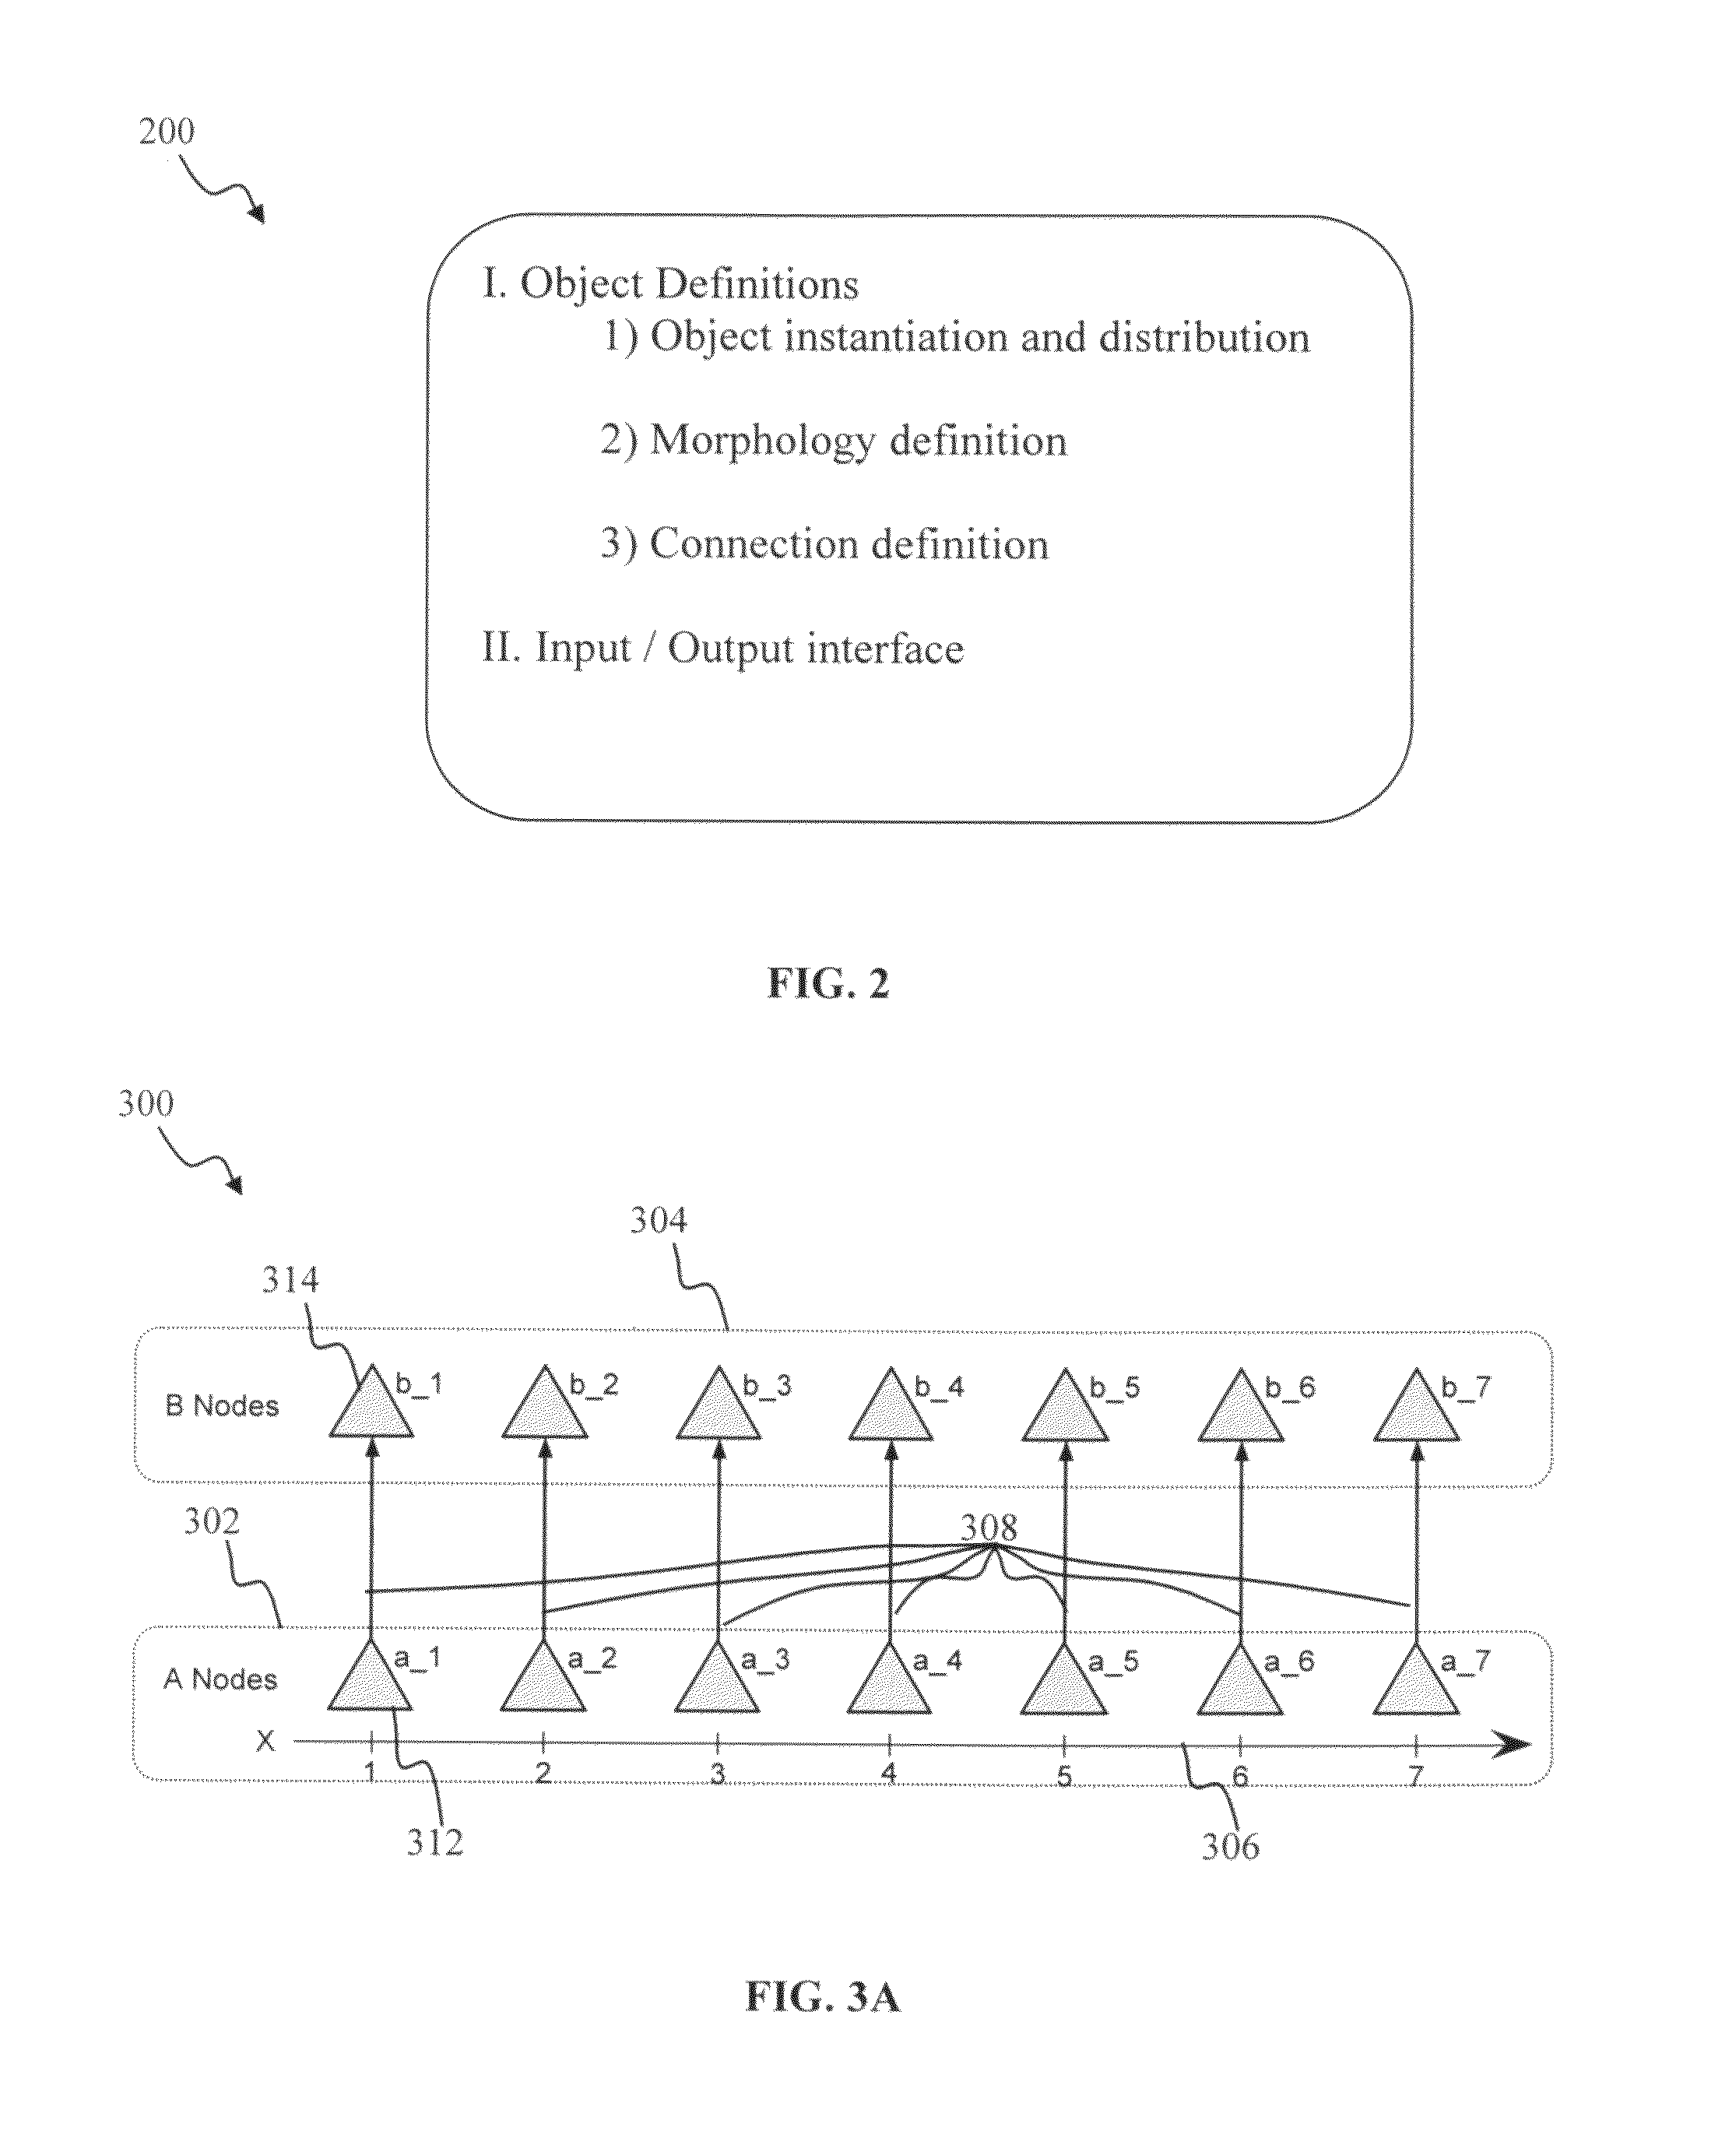 Round-trip engineering apparatus and methods for neural networks